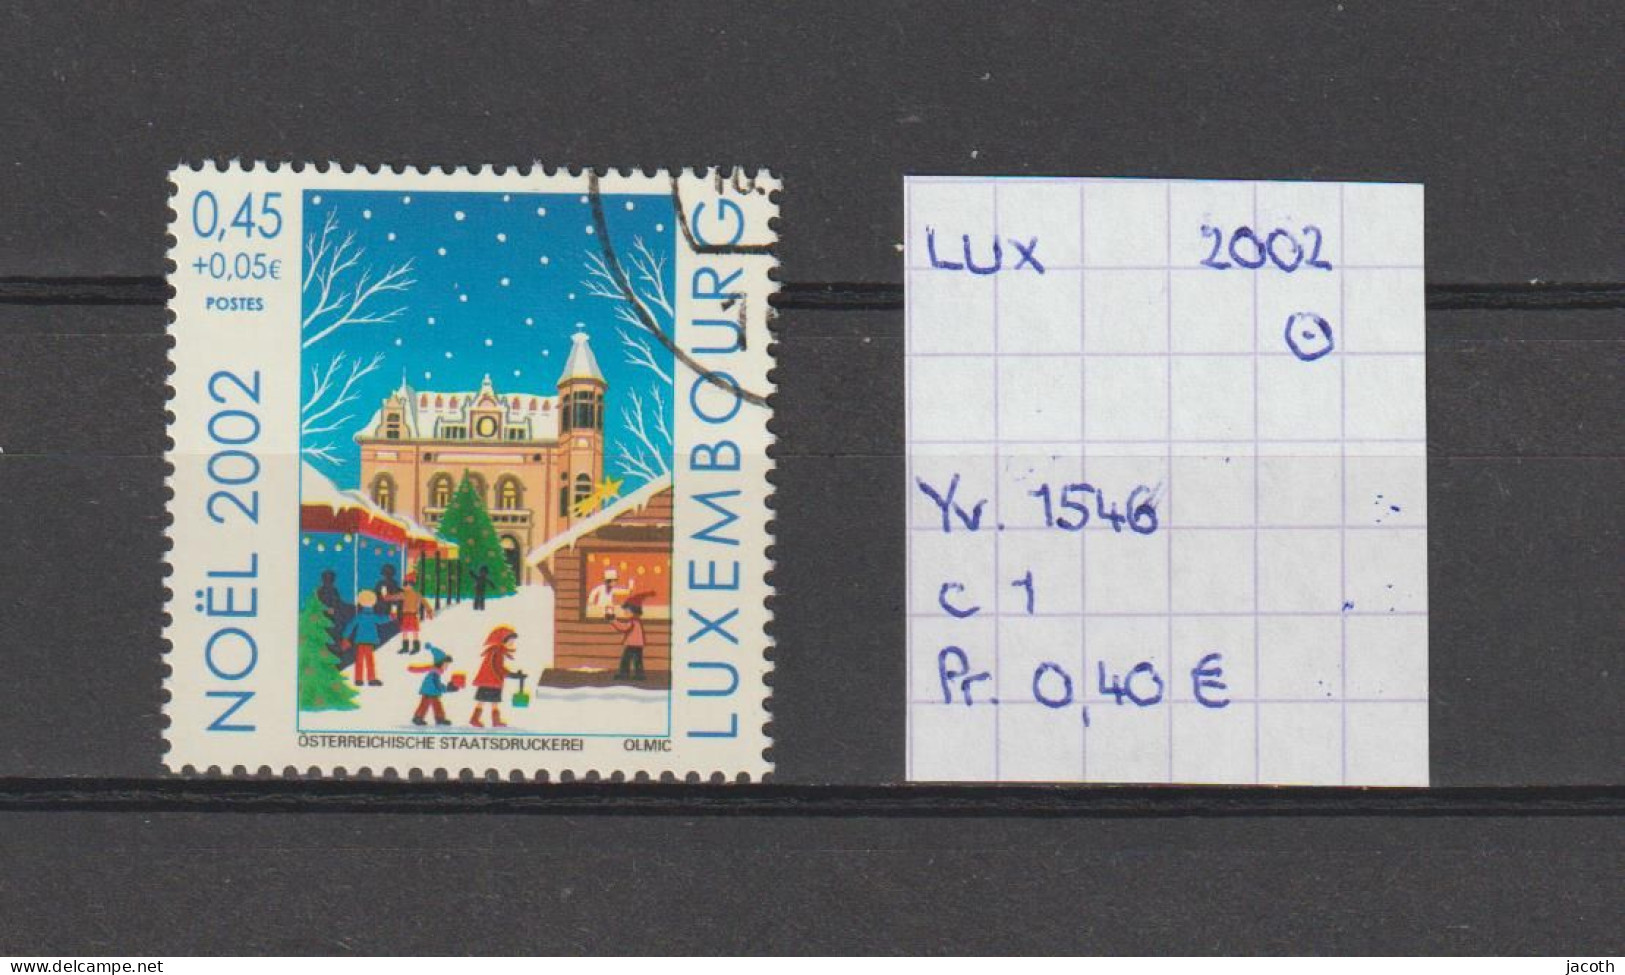 (TJ) Luxembourg 2002 - YT 1546 (gest./obl./used) - Gebraucht